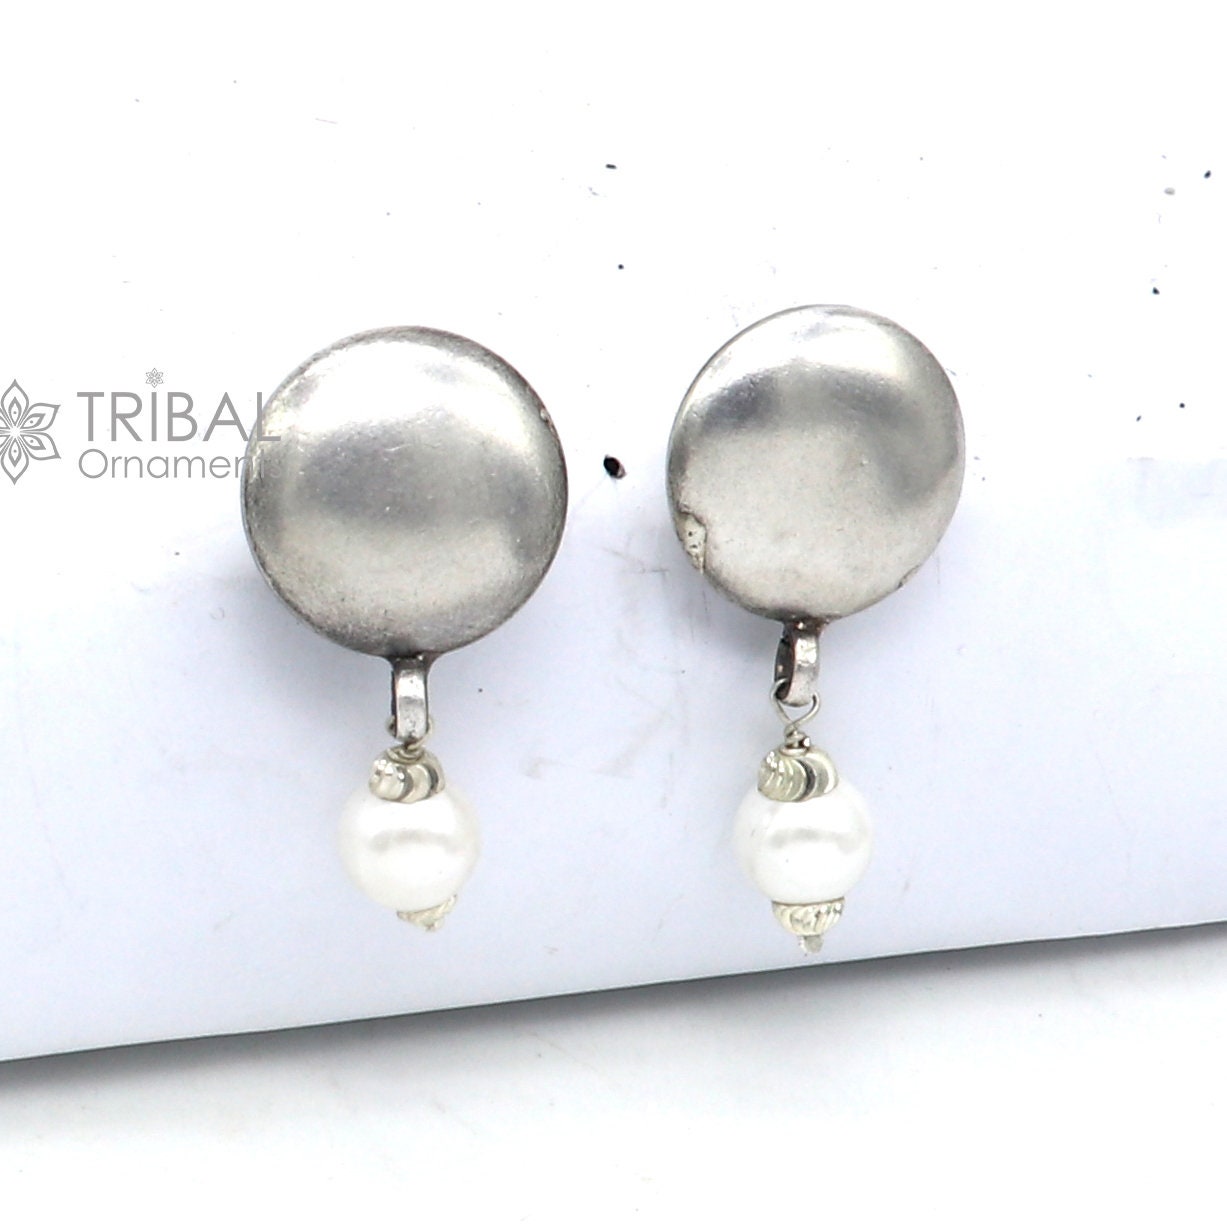 925 sterling silver plain style handmade round design fabulous Stud earrings tribal jewelry from Rajasthan india  s1295